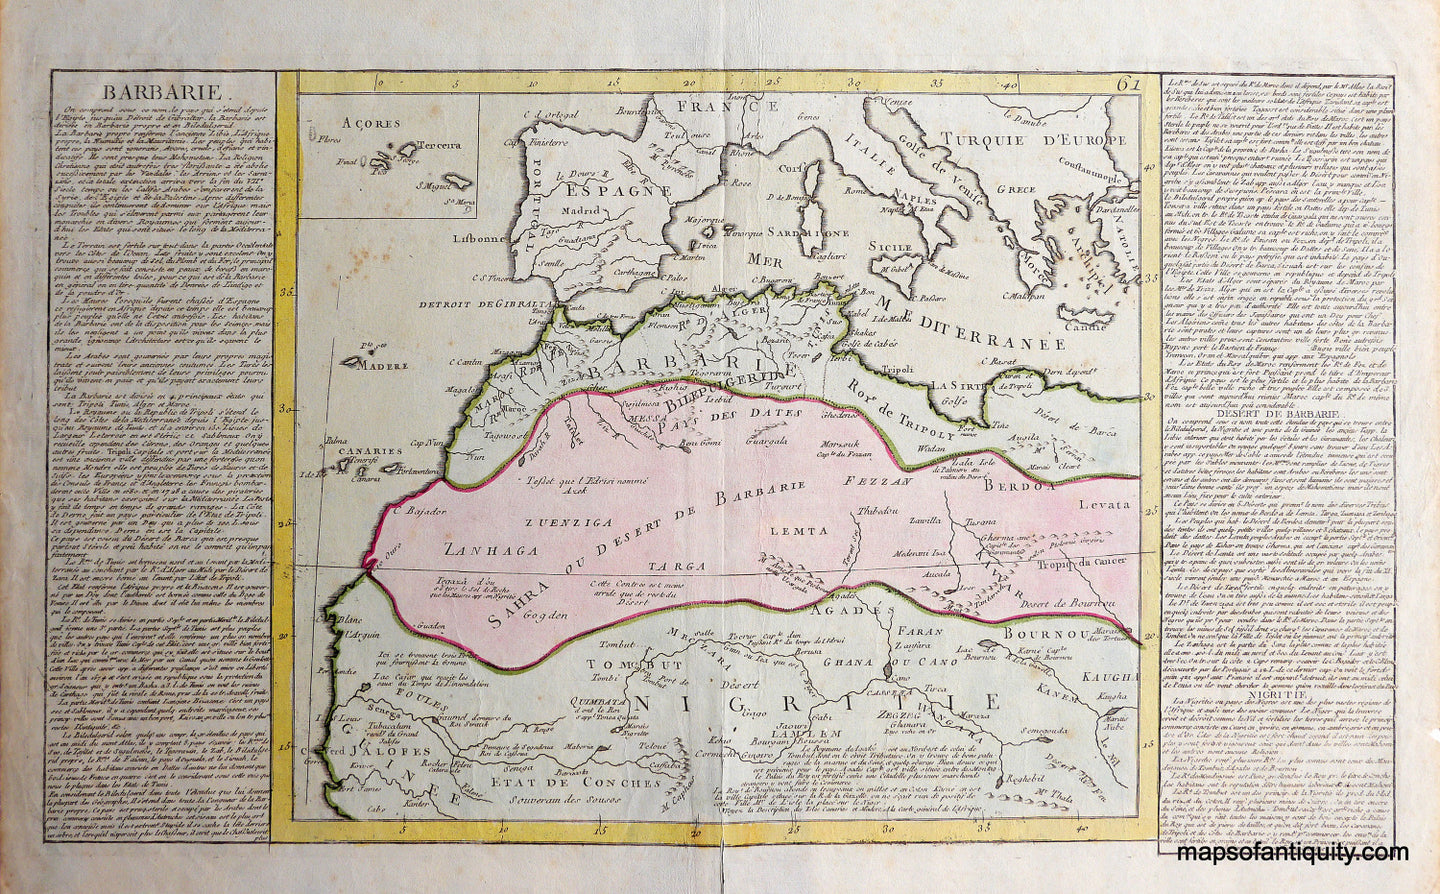 Antique-Hand-Colored-Map-Barbarie-Africa--1790-Clouet-Maps-Of-Antiquity